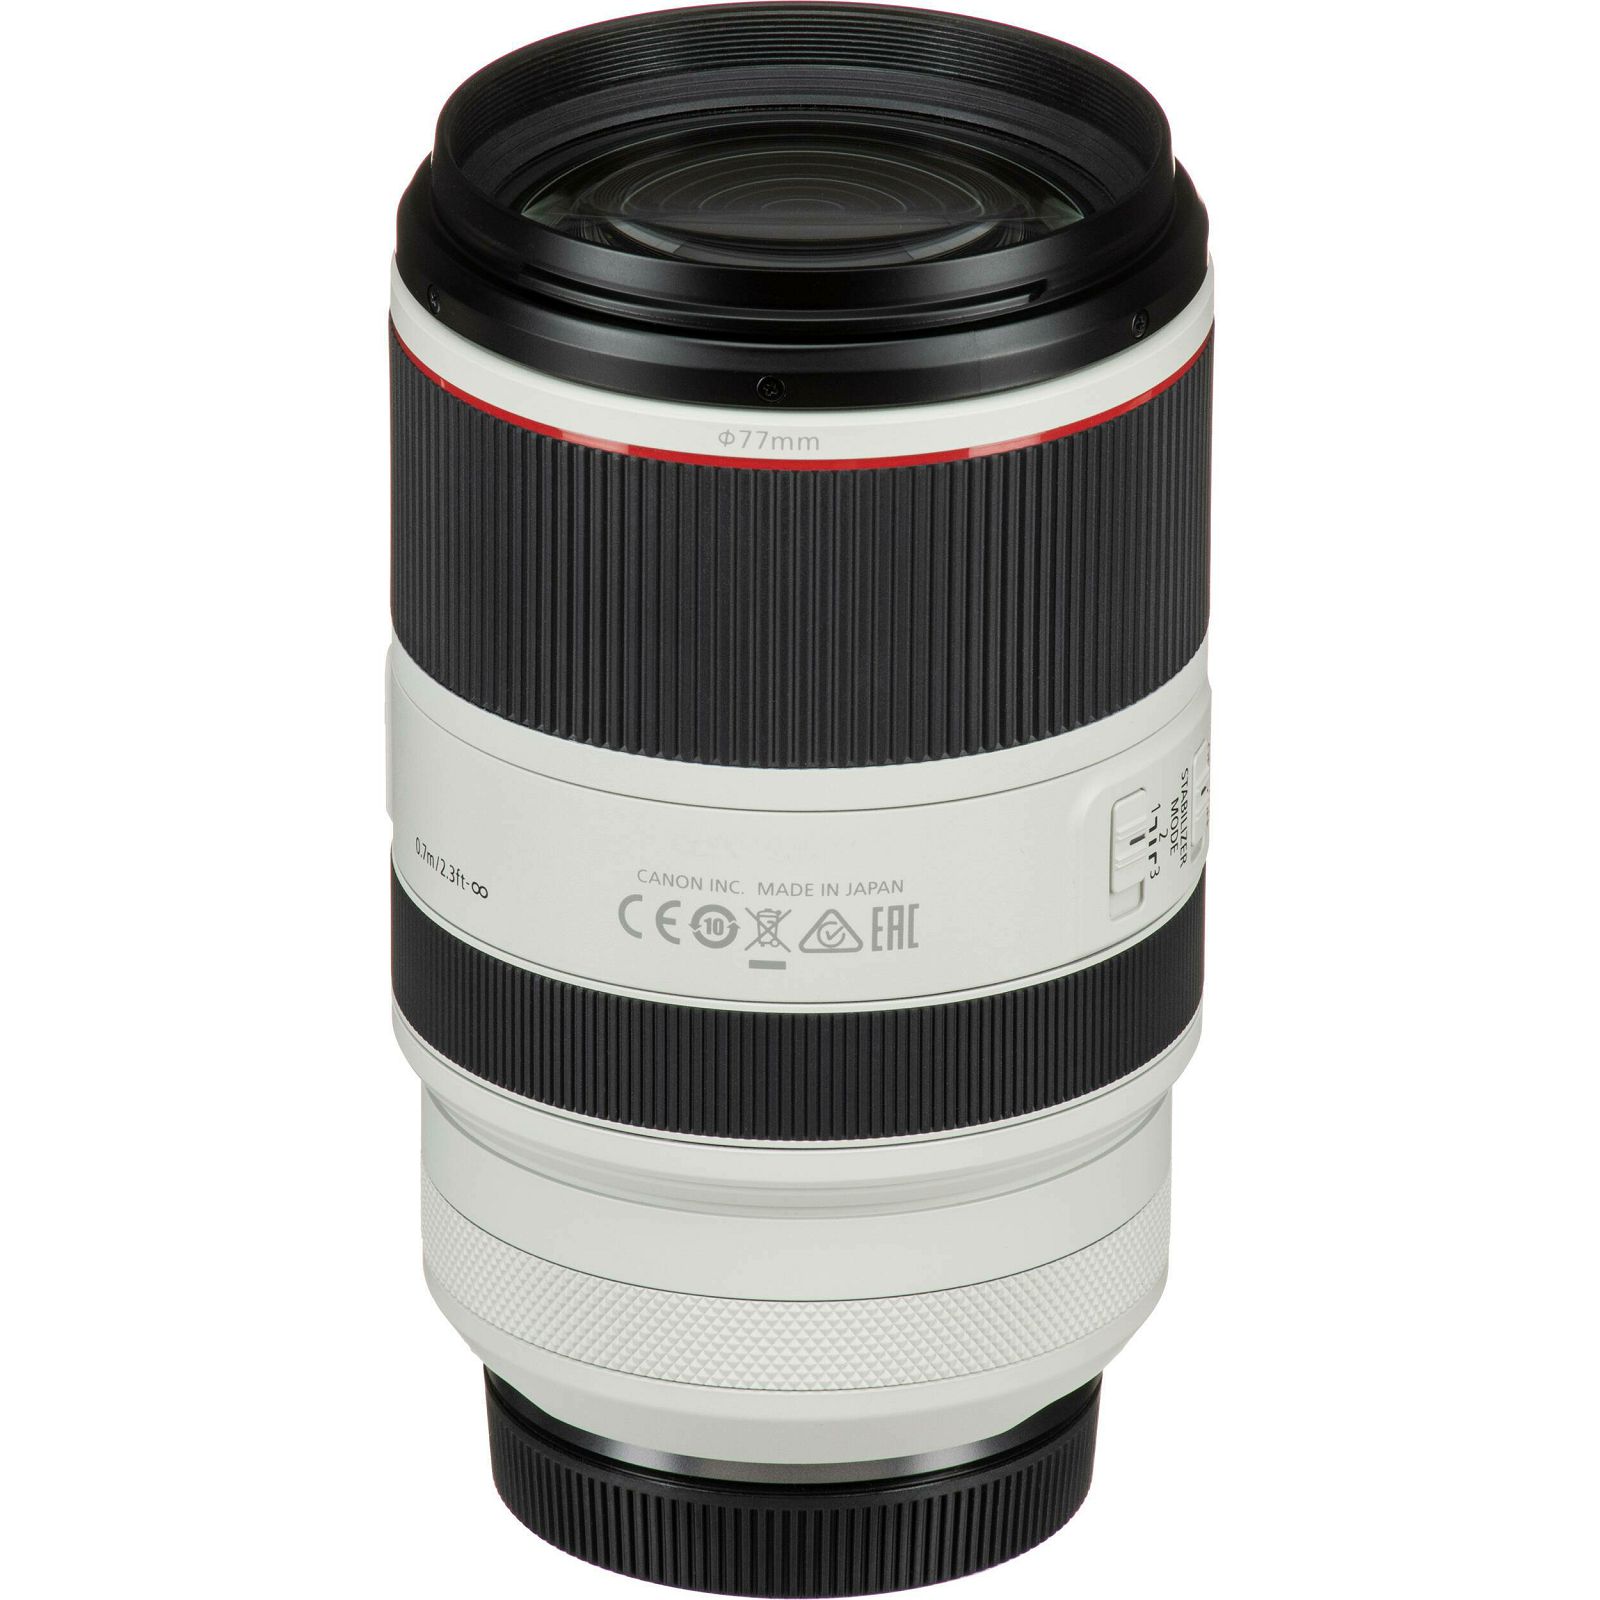 Canon EOS C70 + RF 70-200mm f/2.8 L IS USM